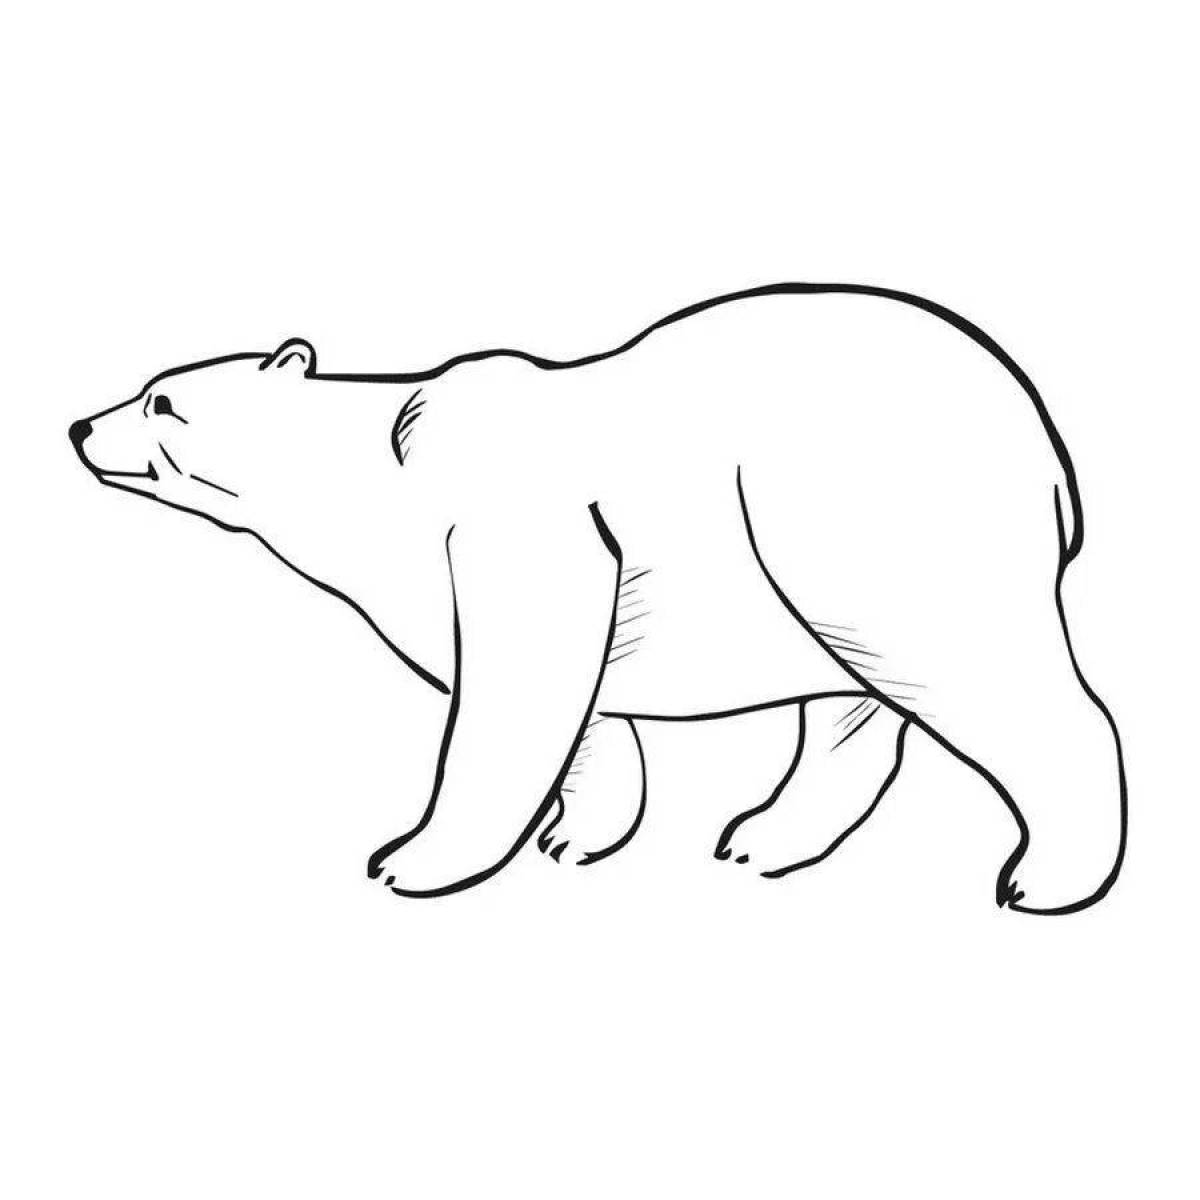 Gorgeous bear coloring book